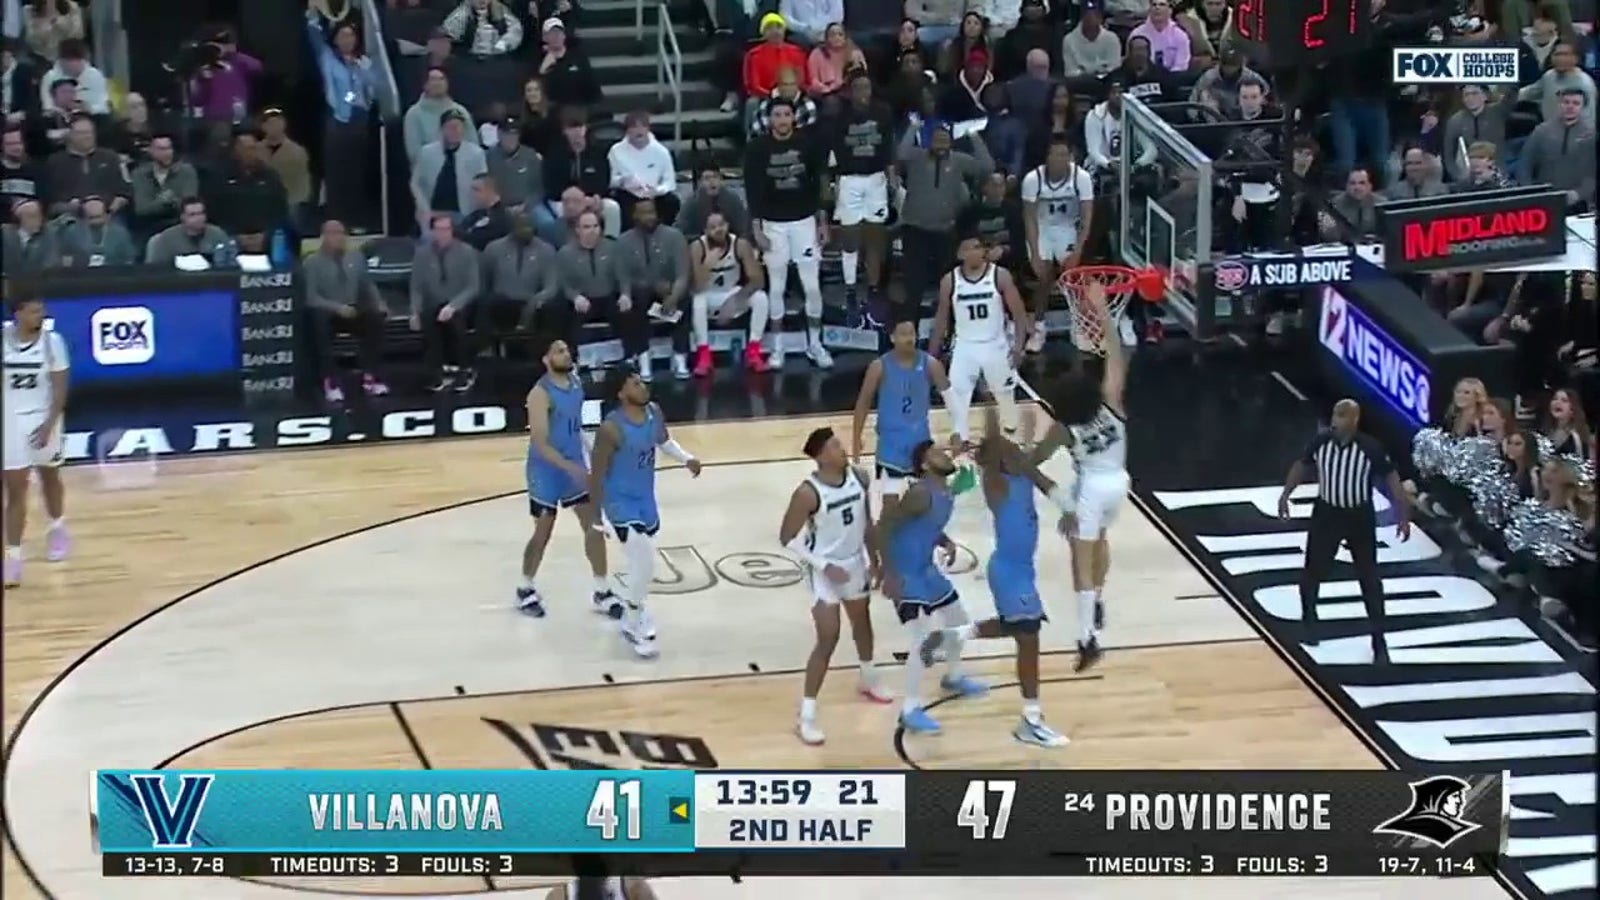 Devin Carter throws down a one-handed jam to extend Providence's lead over Villanova